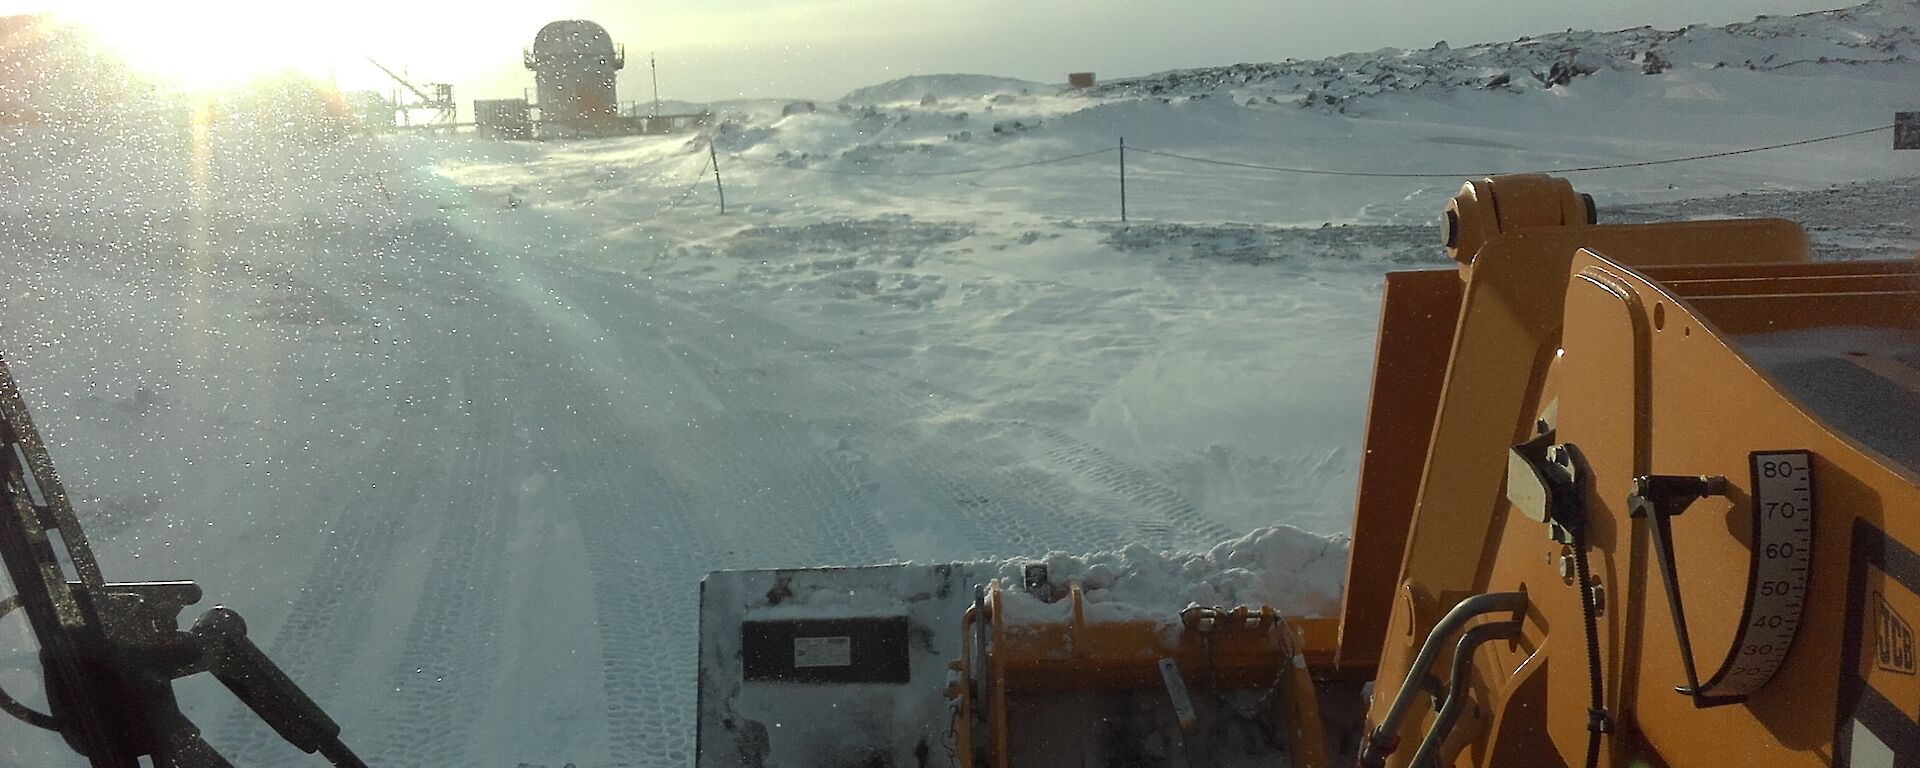 Clearing snow roads in Antarctica